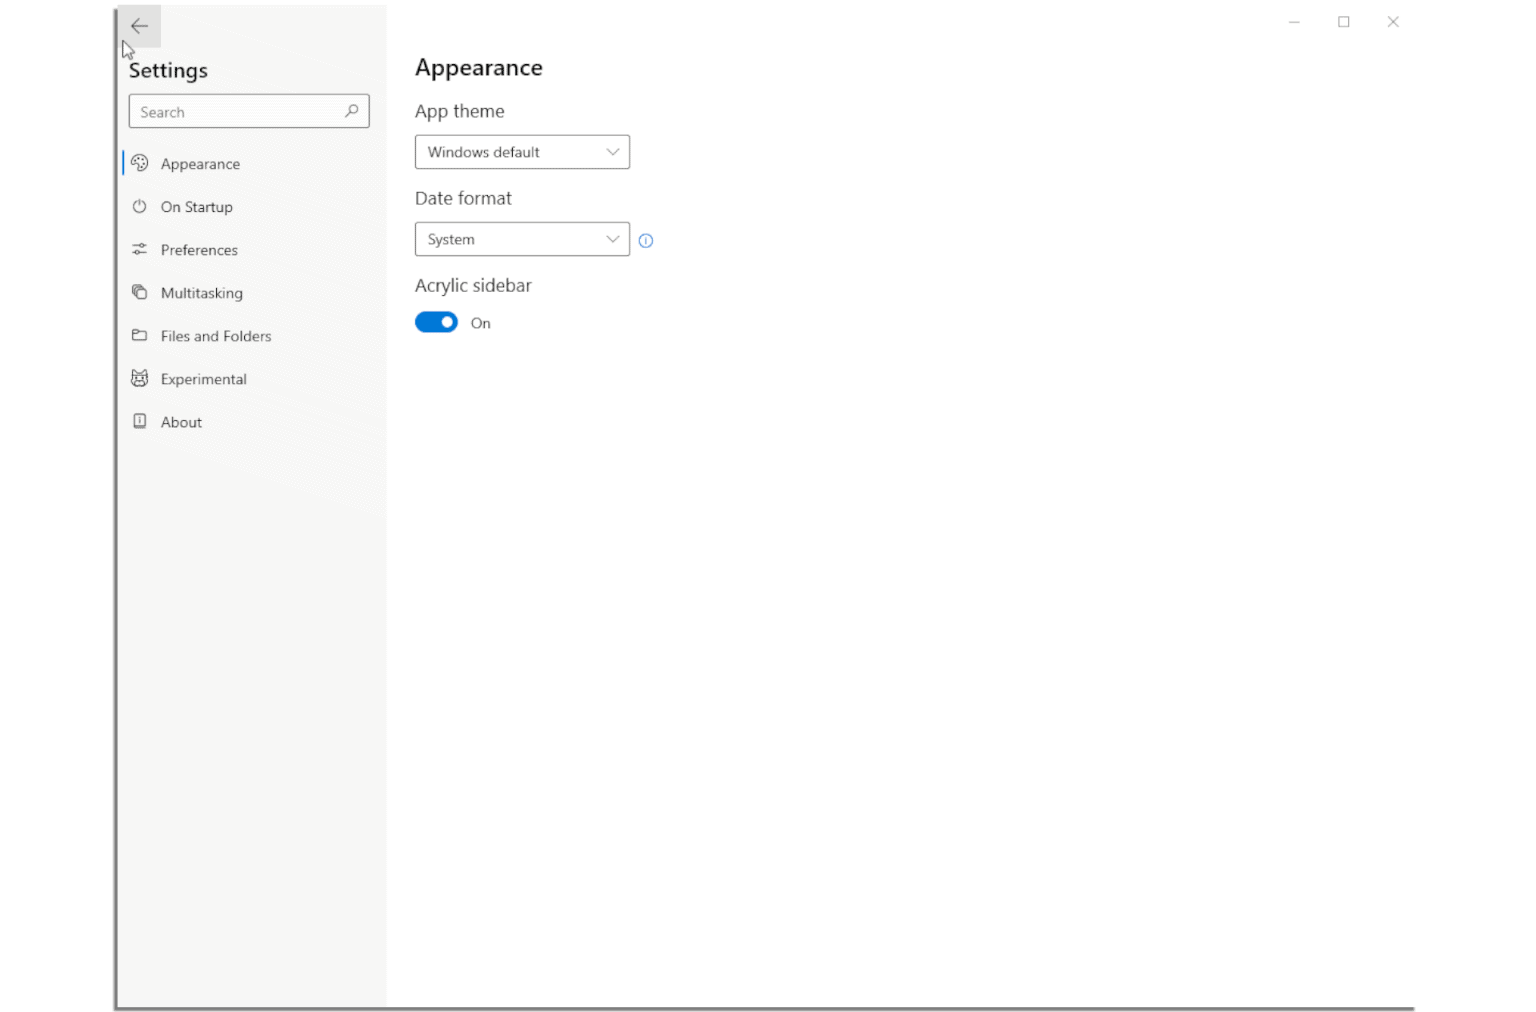 quick preview on windows is blank